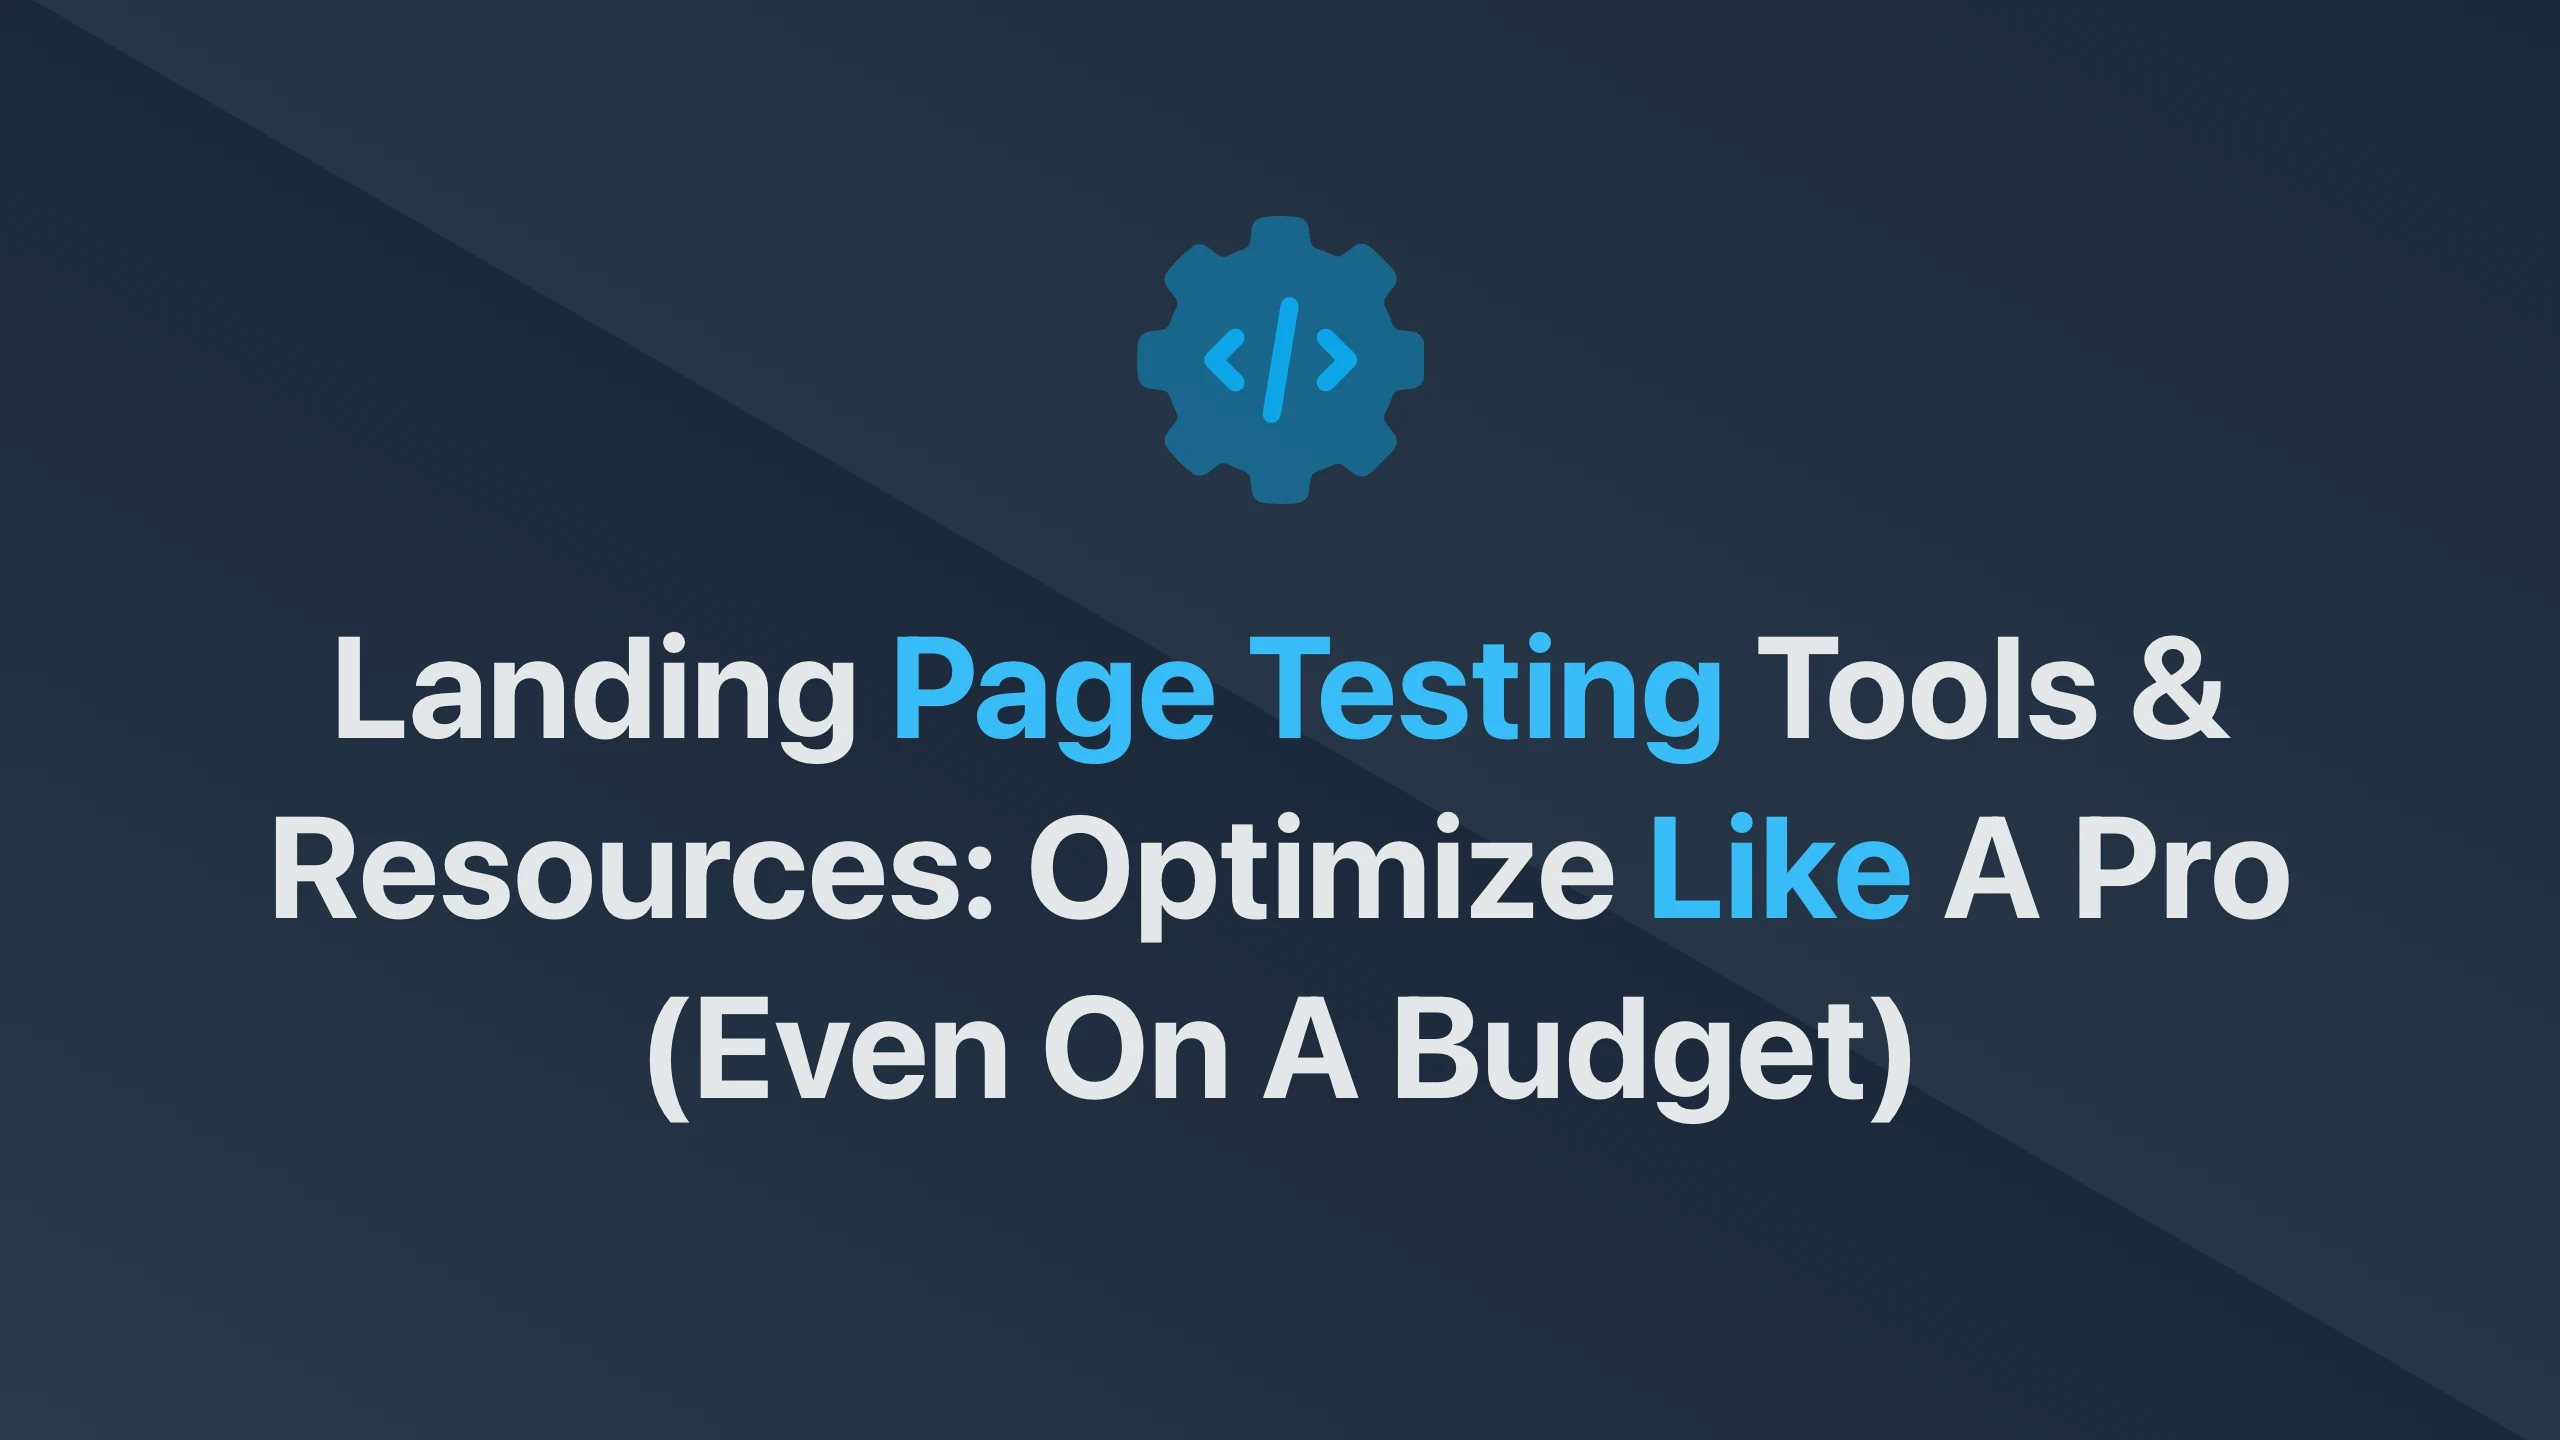 Cover Image for Landing Page Testing Tools & Resources: Optimize like a Pro (Even on a Budget)